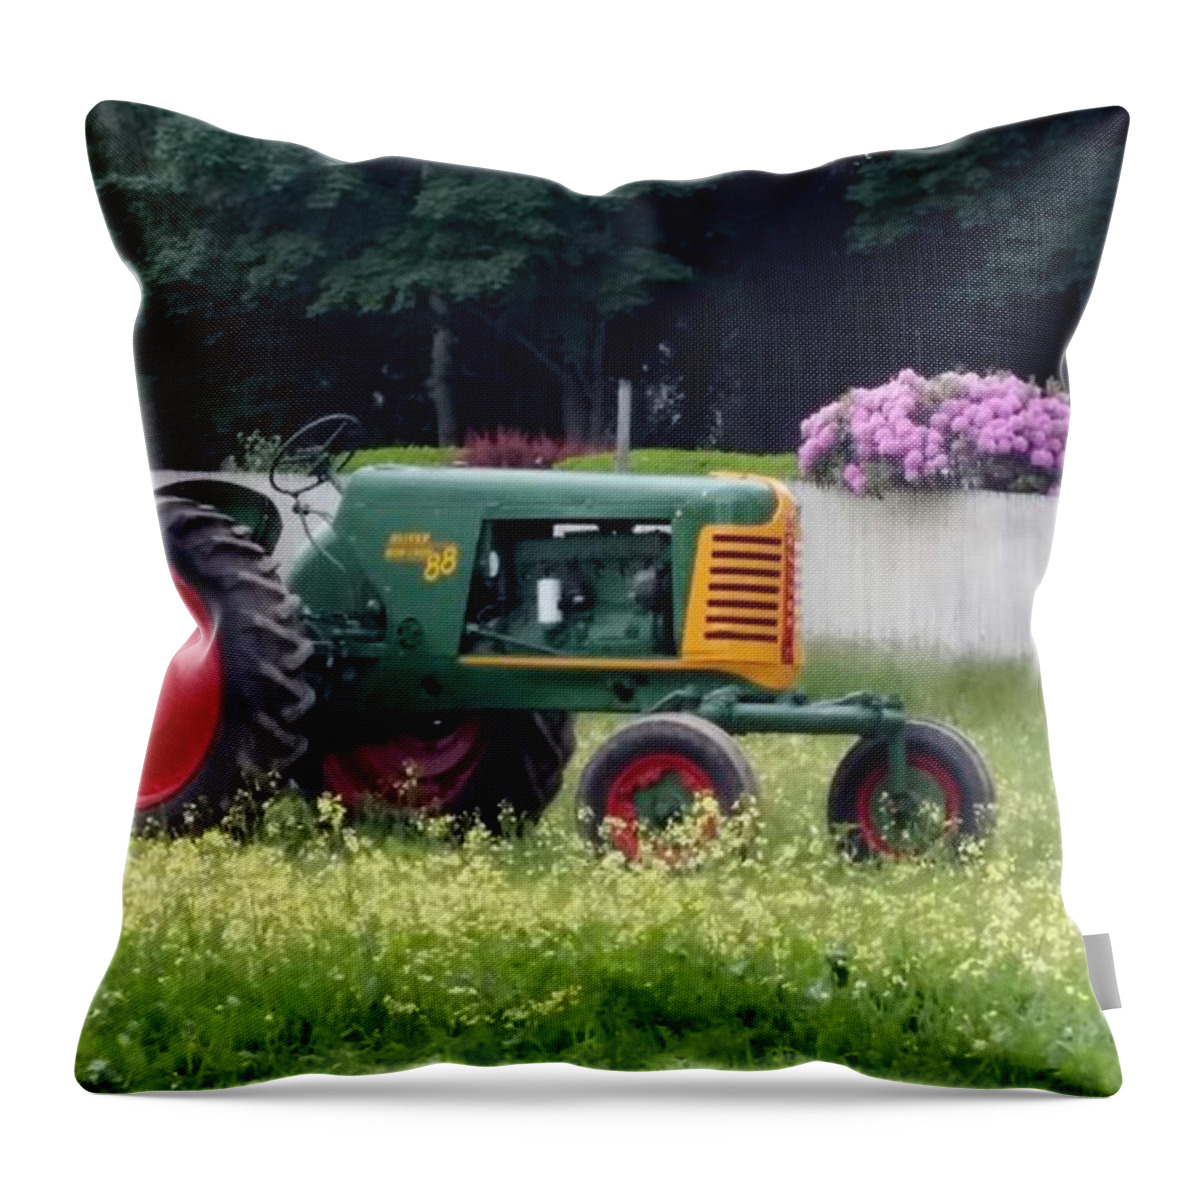 Tracker Throw Pillow featuring the photograph John Deere by Rob Hans